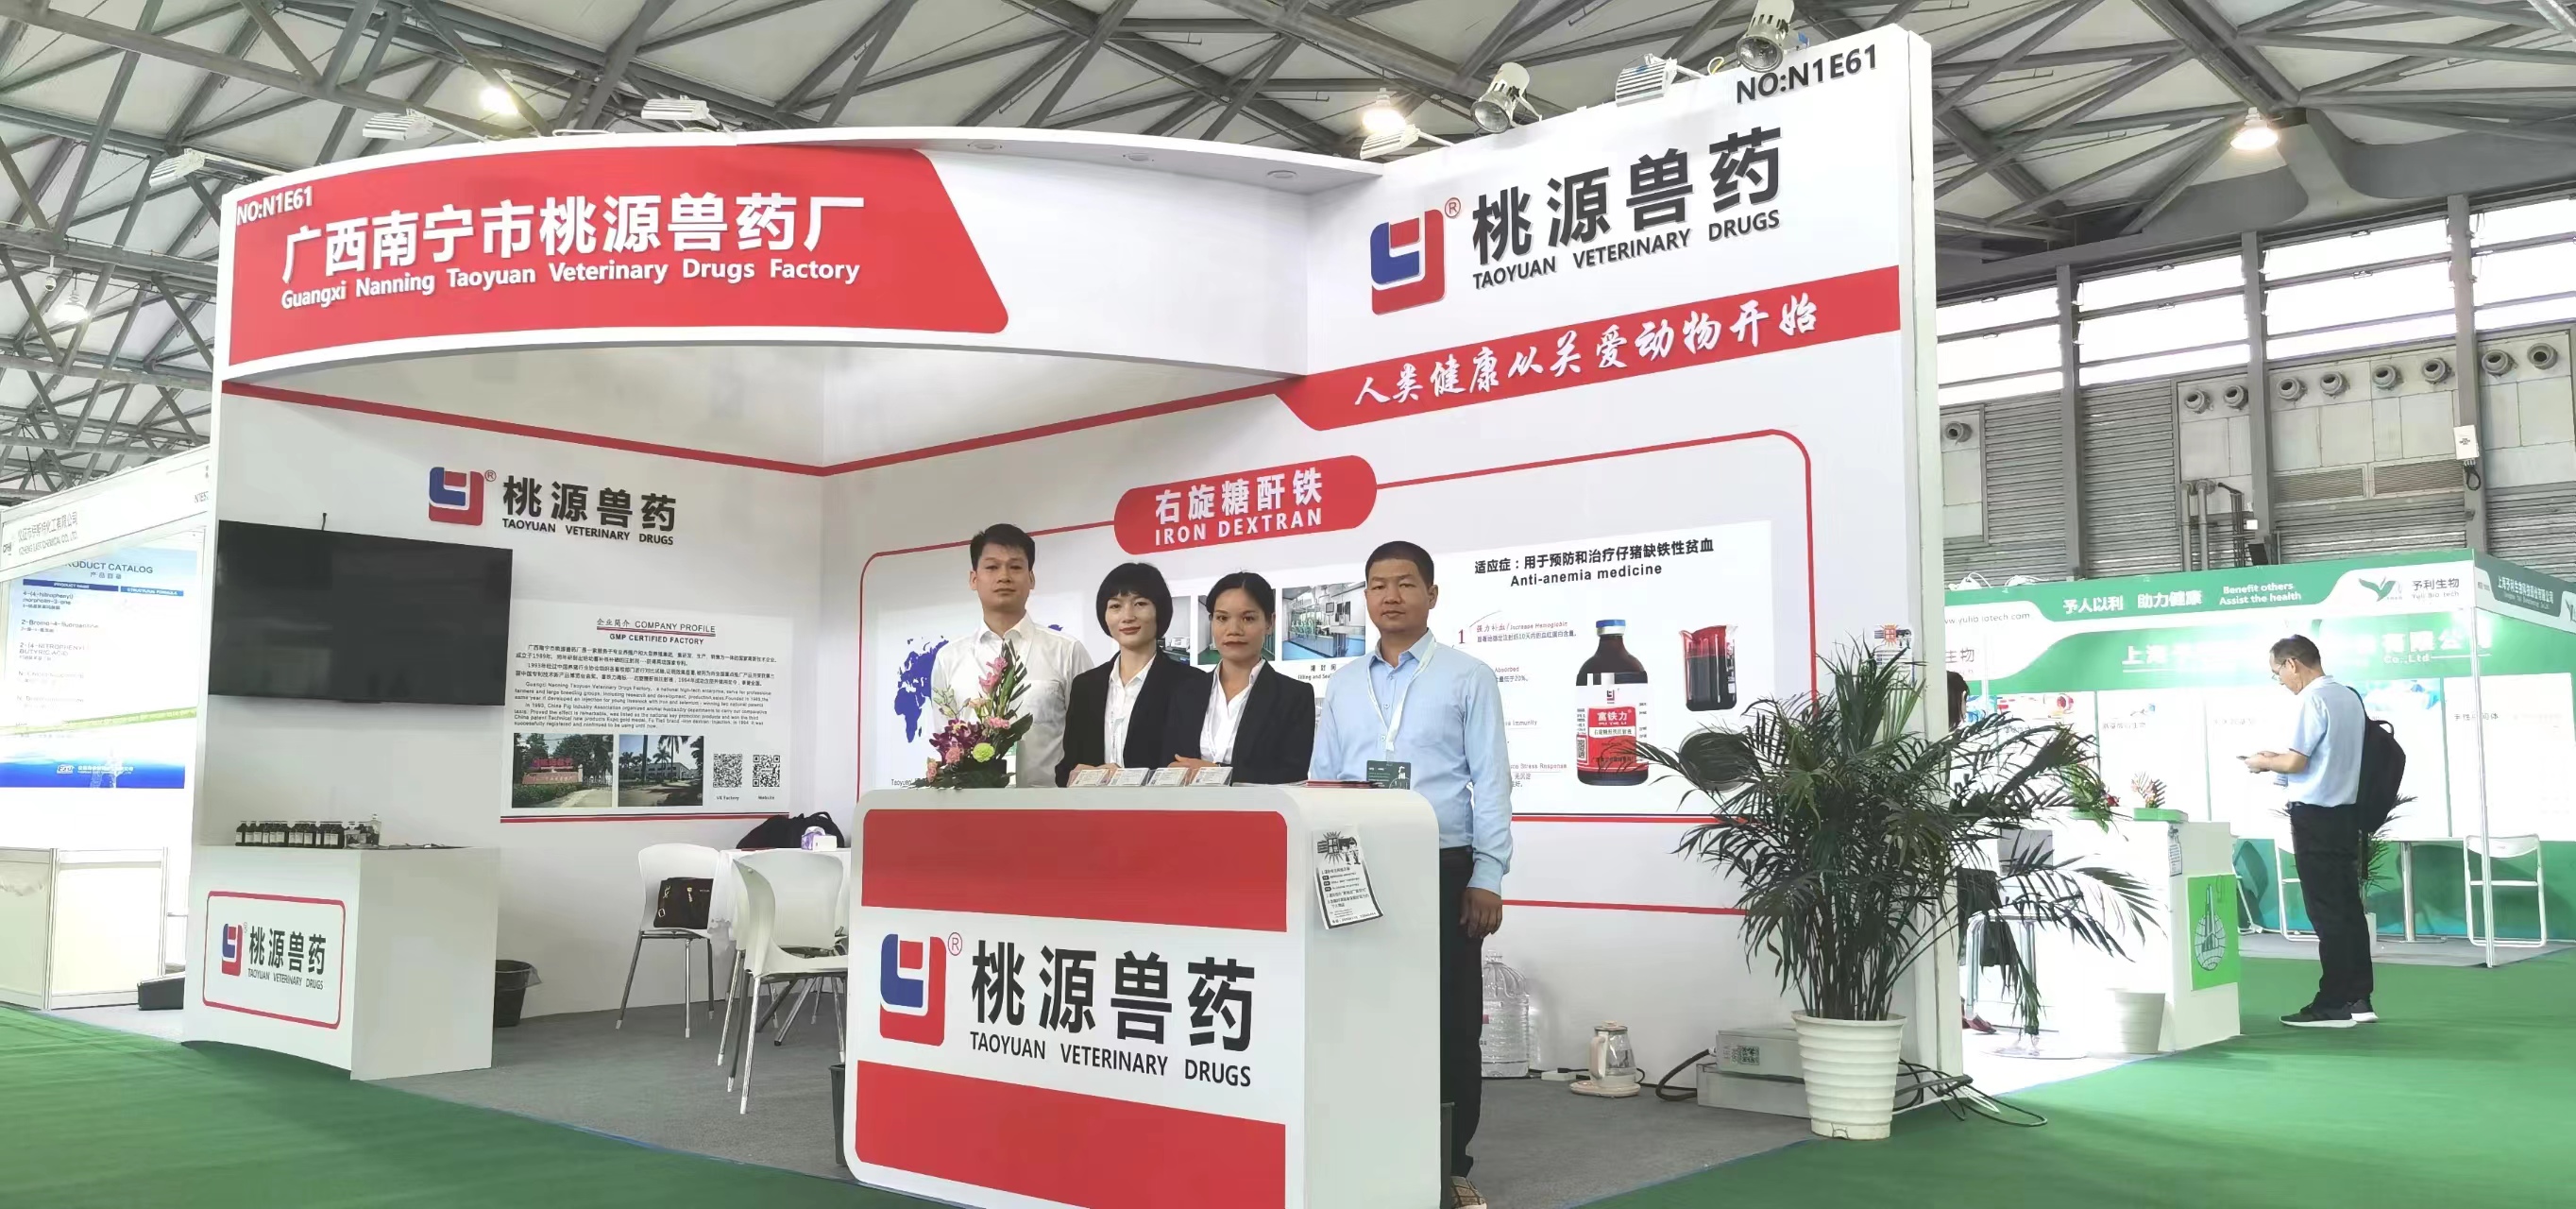 The 21st CPHI Exhibition in Shanghai